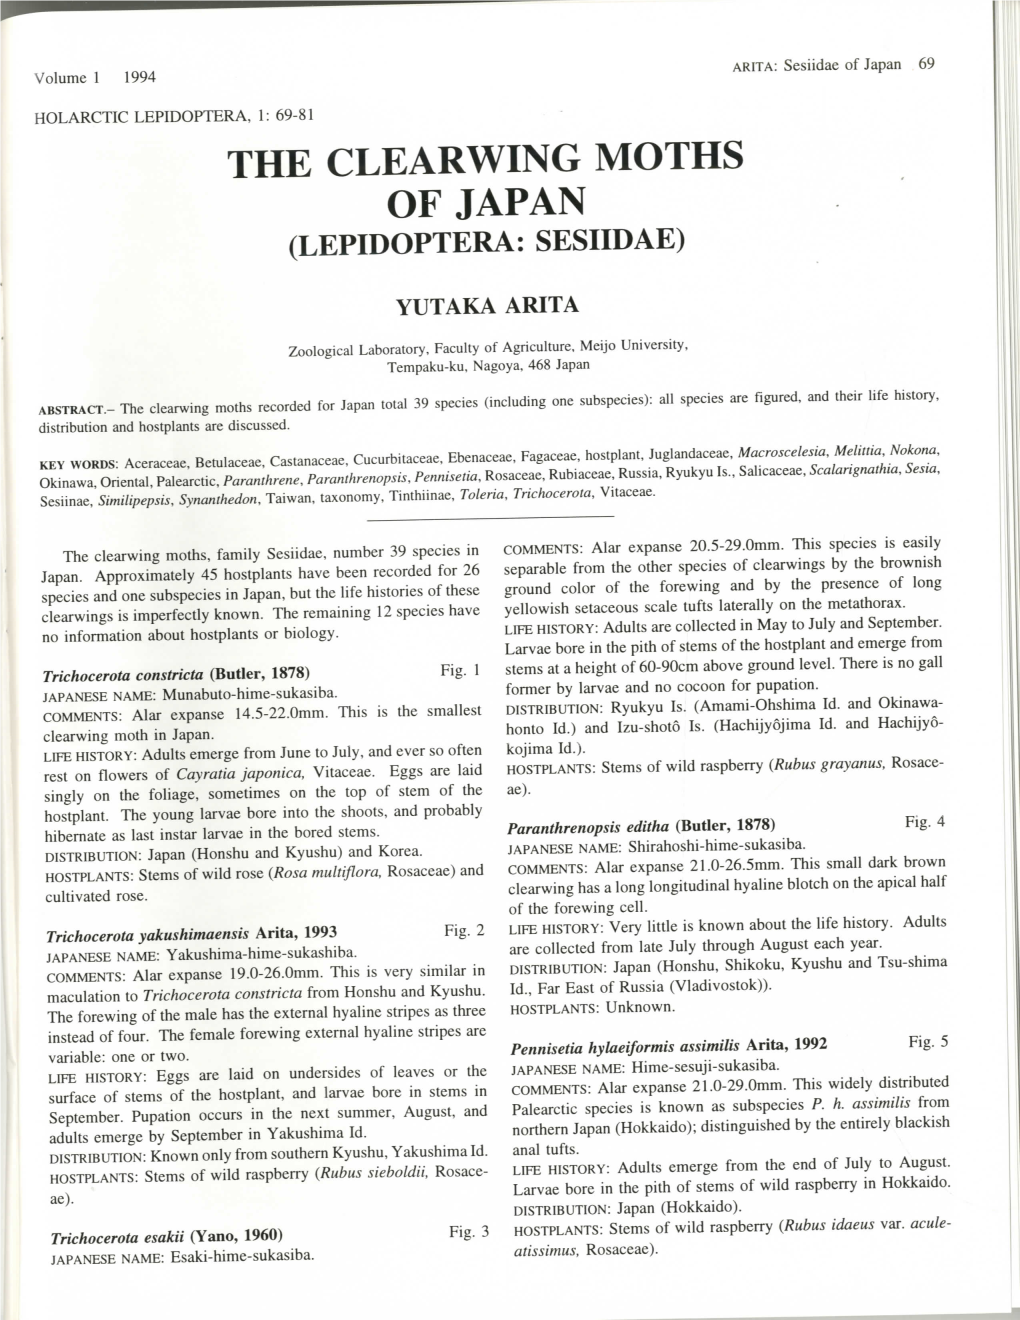 The Clearwing Moths of Japan (Lepidoptera: Sesiidae)